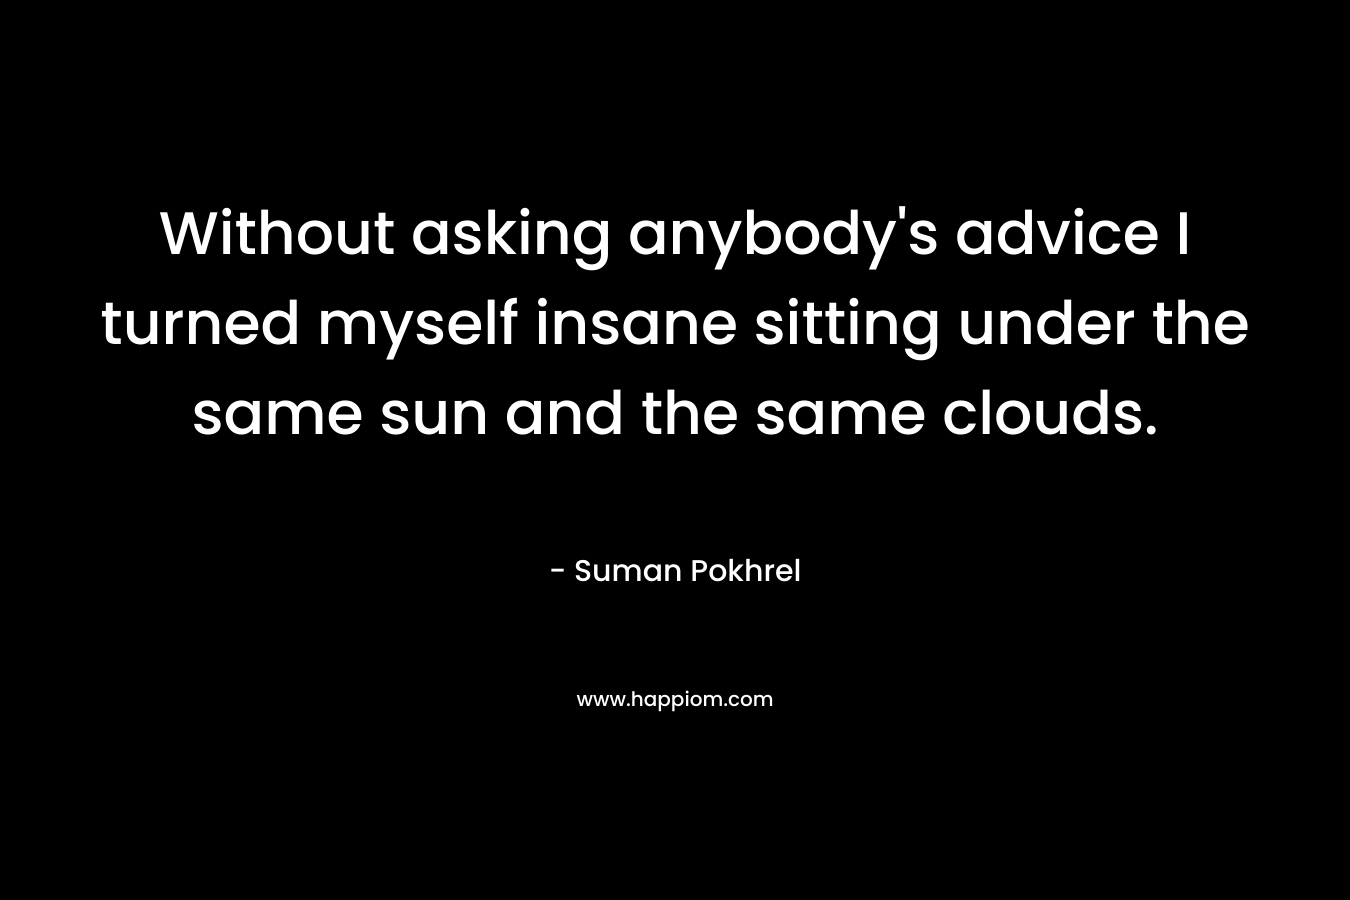 Without asking anybody's advice I turned myself insane sitting under the same sun and the same clouds.